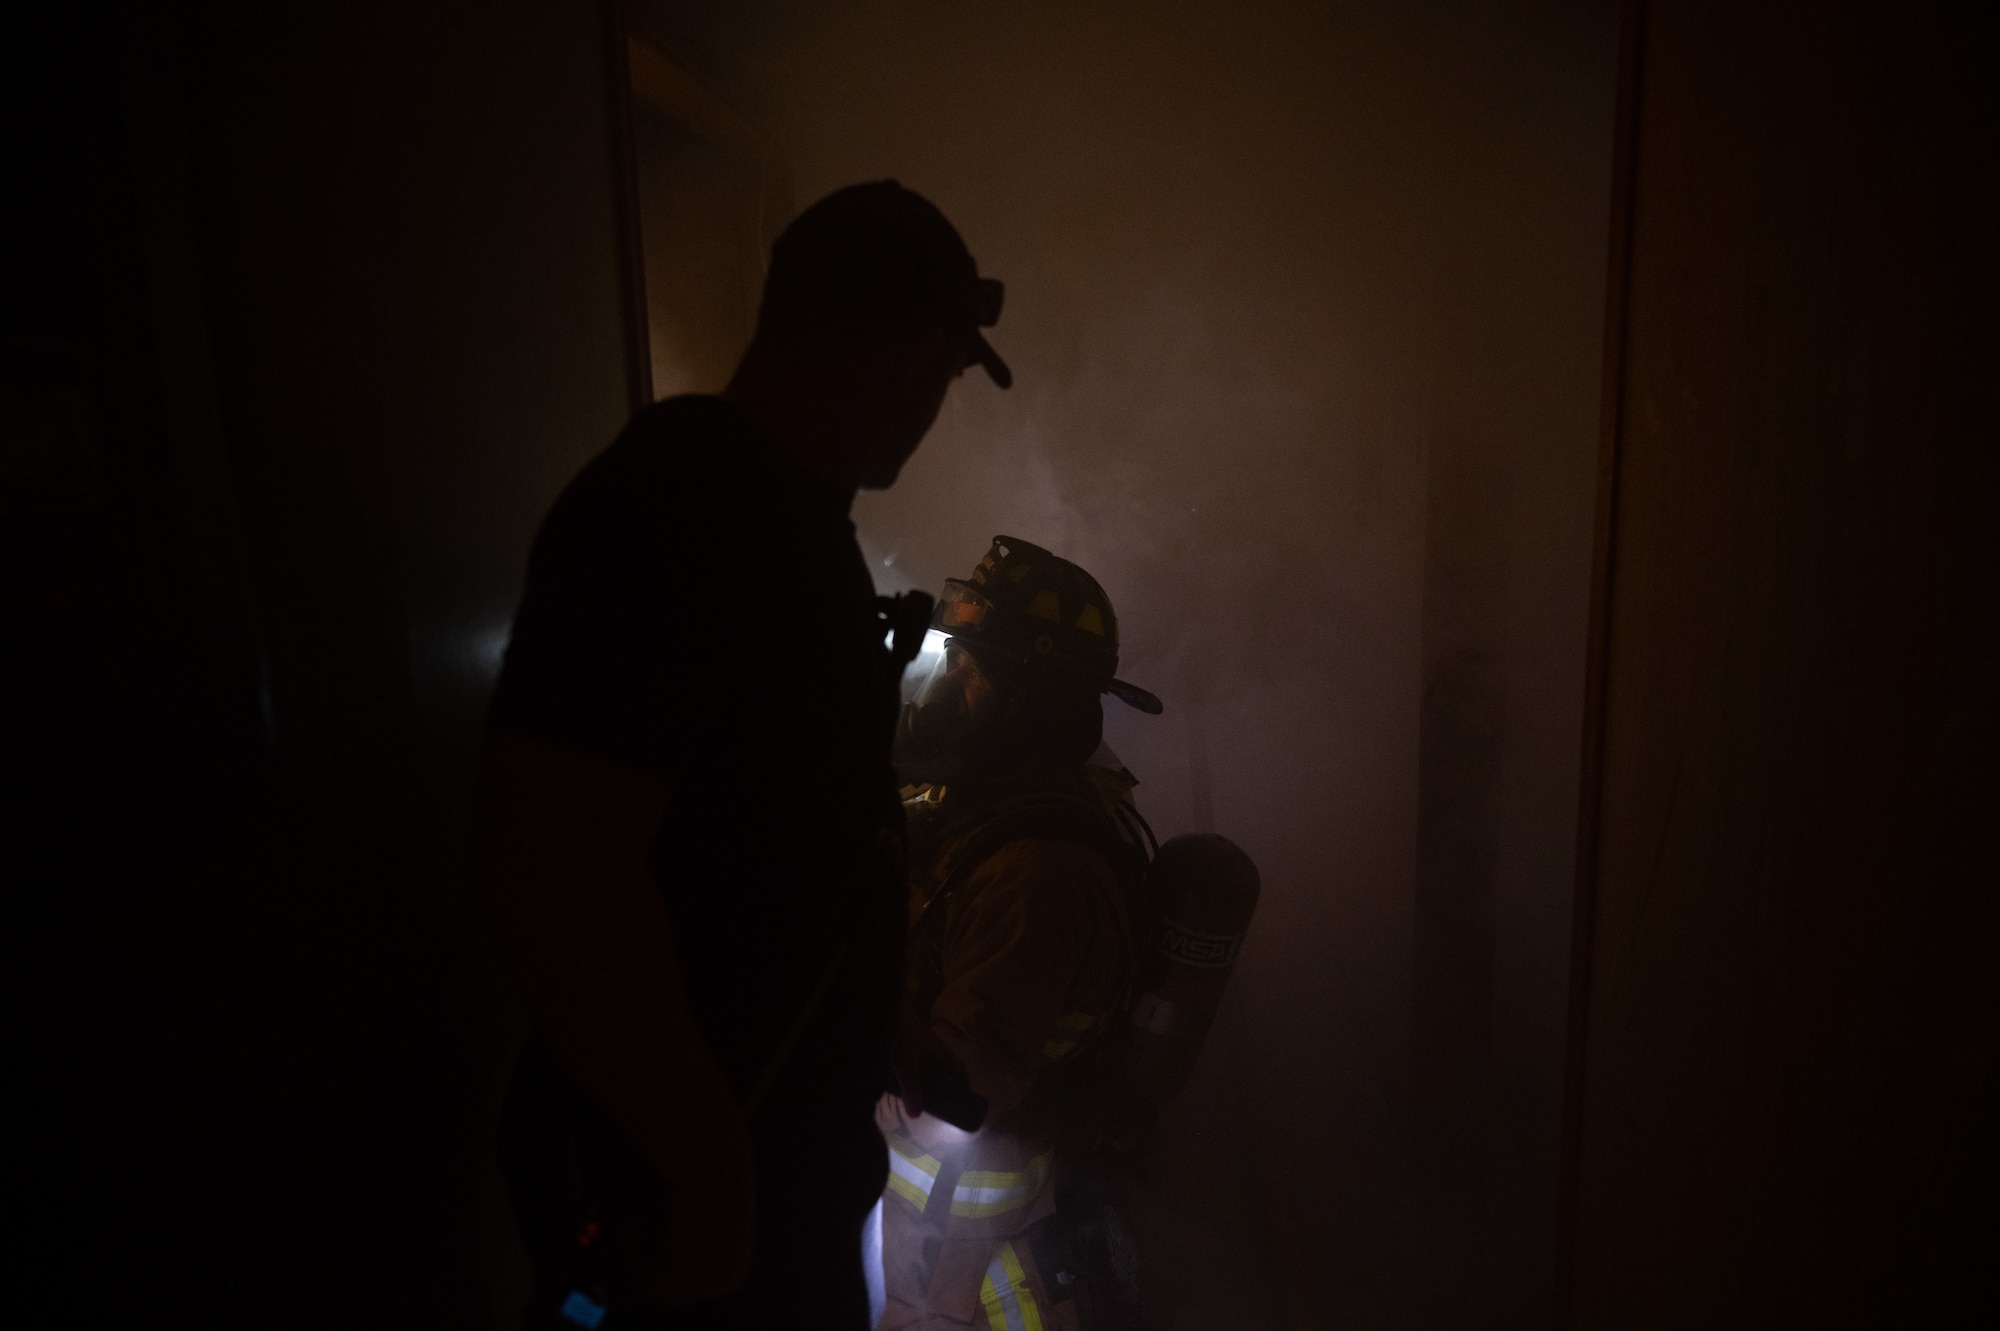 U.S. Air Force Staff Sgt. Logan Williams, part of the firefighter training team looks on as Senior Airman William Webber, a firefighter assigned to the 379th Expeditionary Civil Engineer Squadron, stays low to keep cool while opening a door during an exercise Aug.30, 2022 at Al Udeid Air Base, Qatar. The firefighters entered a simulated smoke filled facility to remain proficient in conducting search and rescue operations in low visibility environments. (U.S. Air Force photo by Staff Sgt. Dana Tourtellotte)